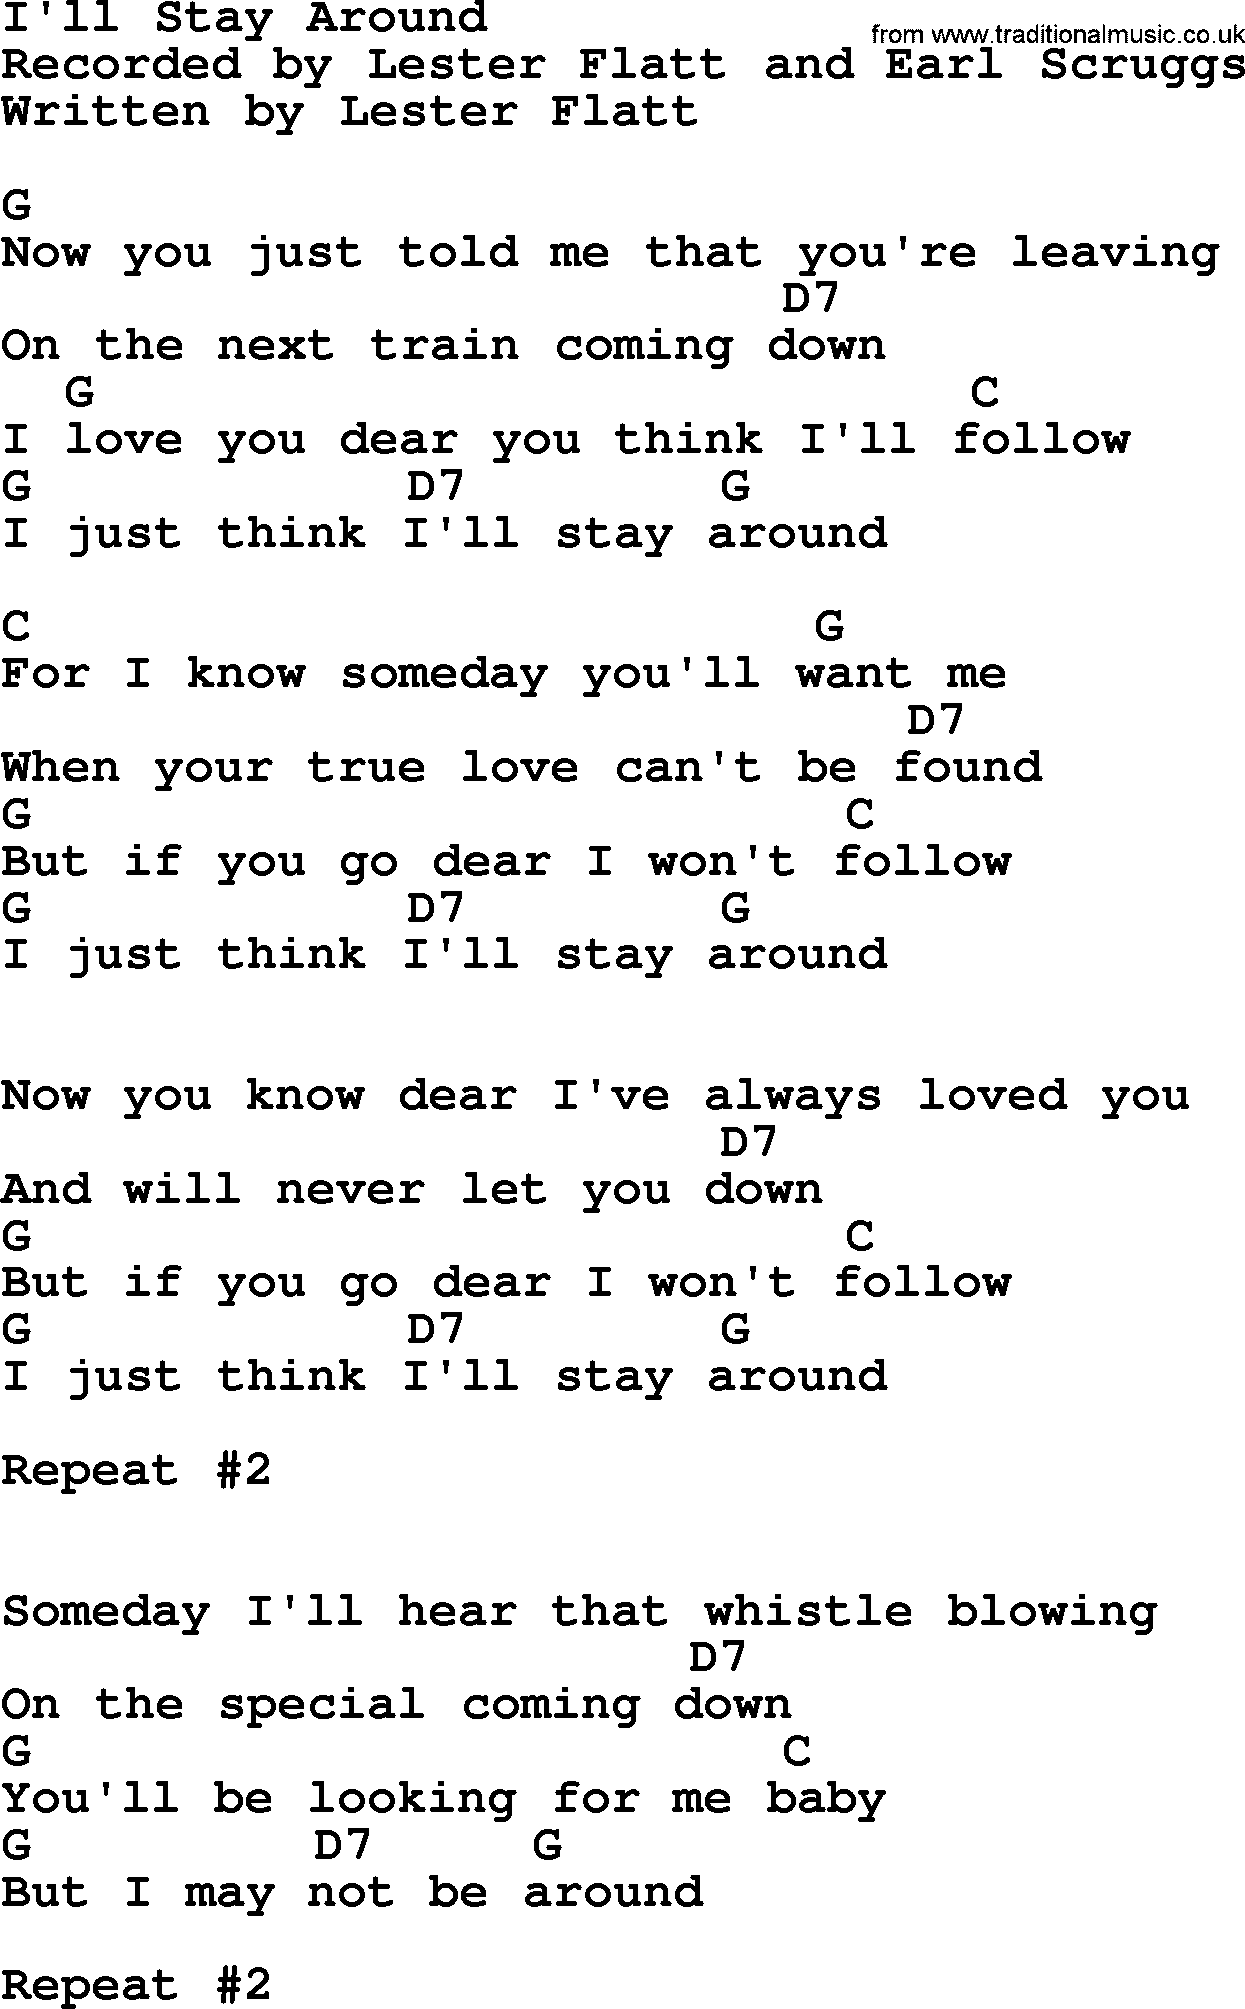 Bluegrass song: I'll Stay Around, lyrics and chords